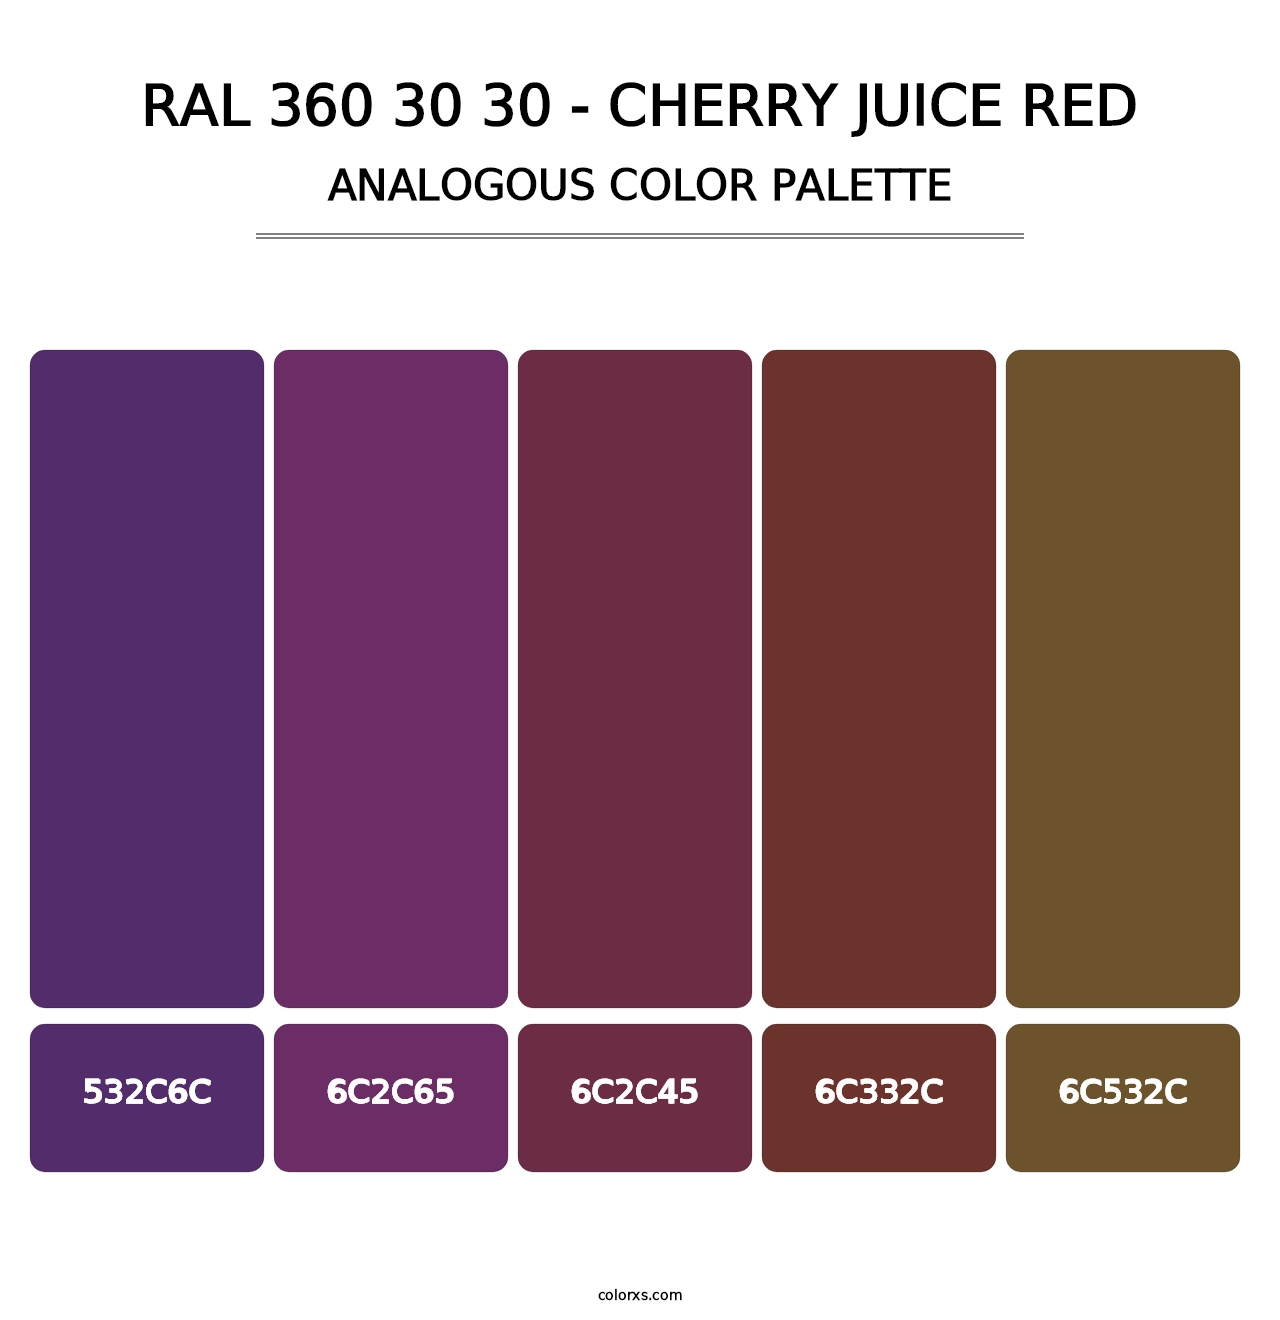 RAL 360 30 30 - Cherry Juice Red - Analogous Color Palette